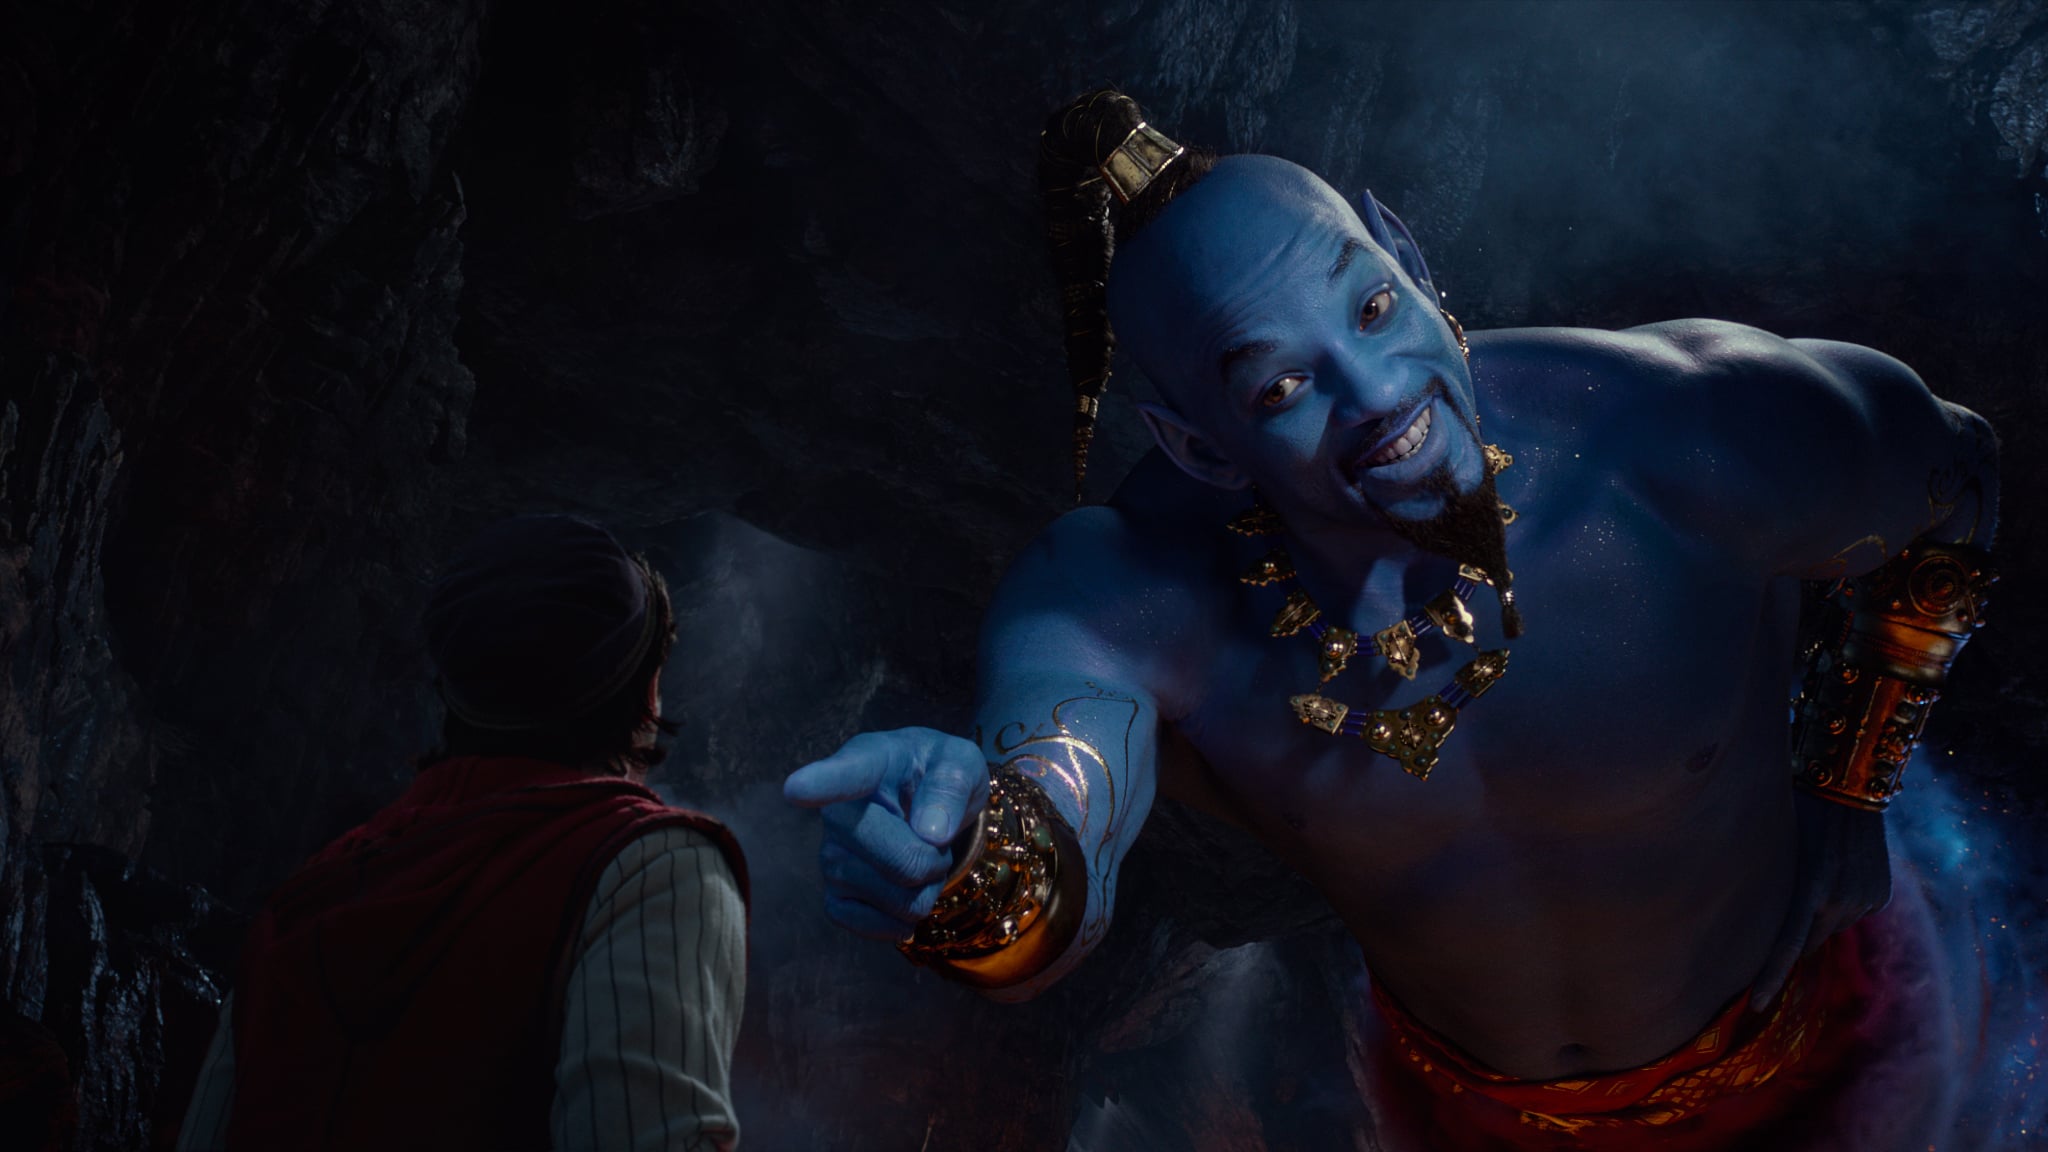 Aladdin (Mena Massoud) meets the larger-than-life blue Genie (Will Smith) in Disney's live-action adaptation ALADDIN, directed by Guy Ritchie.